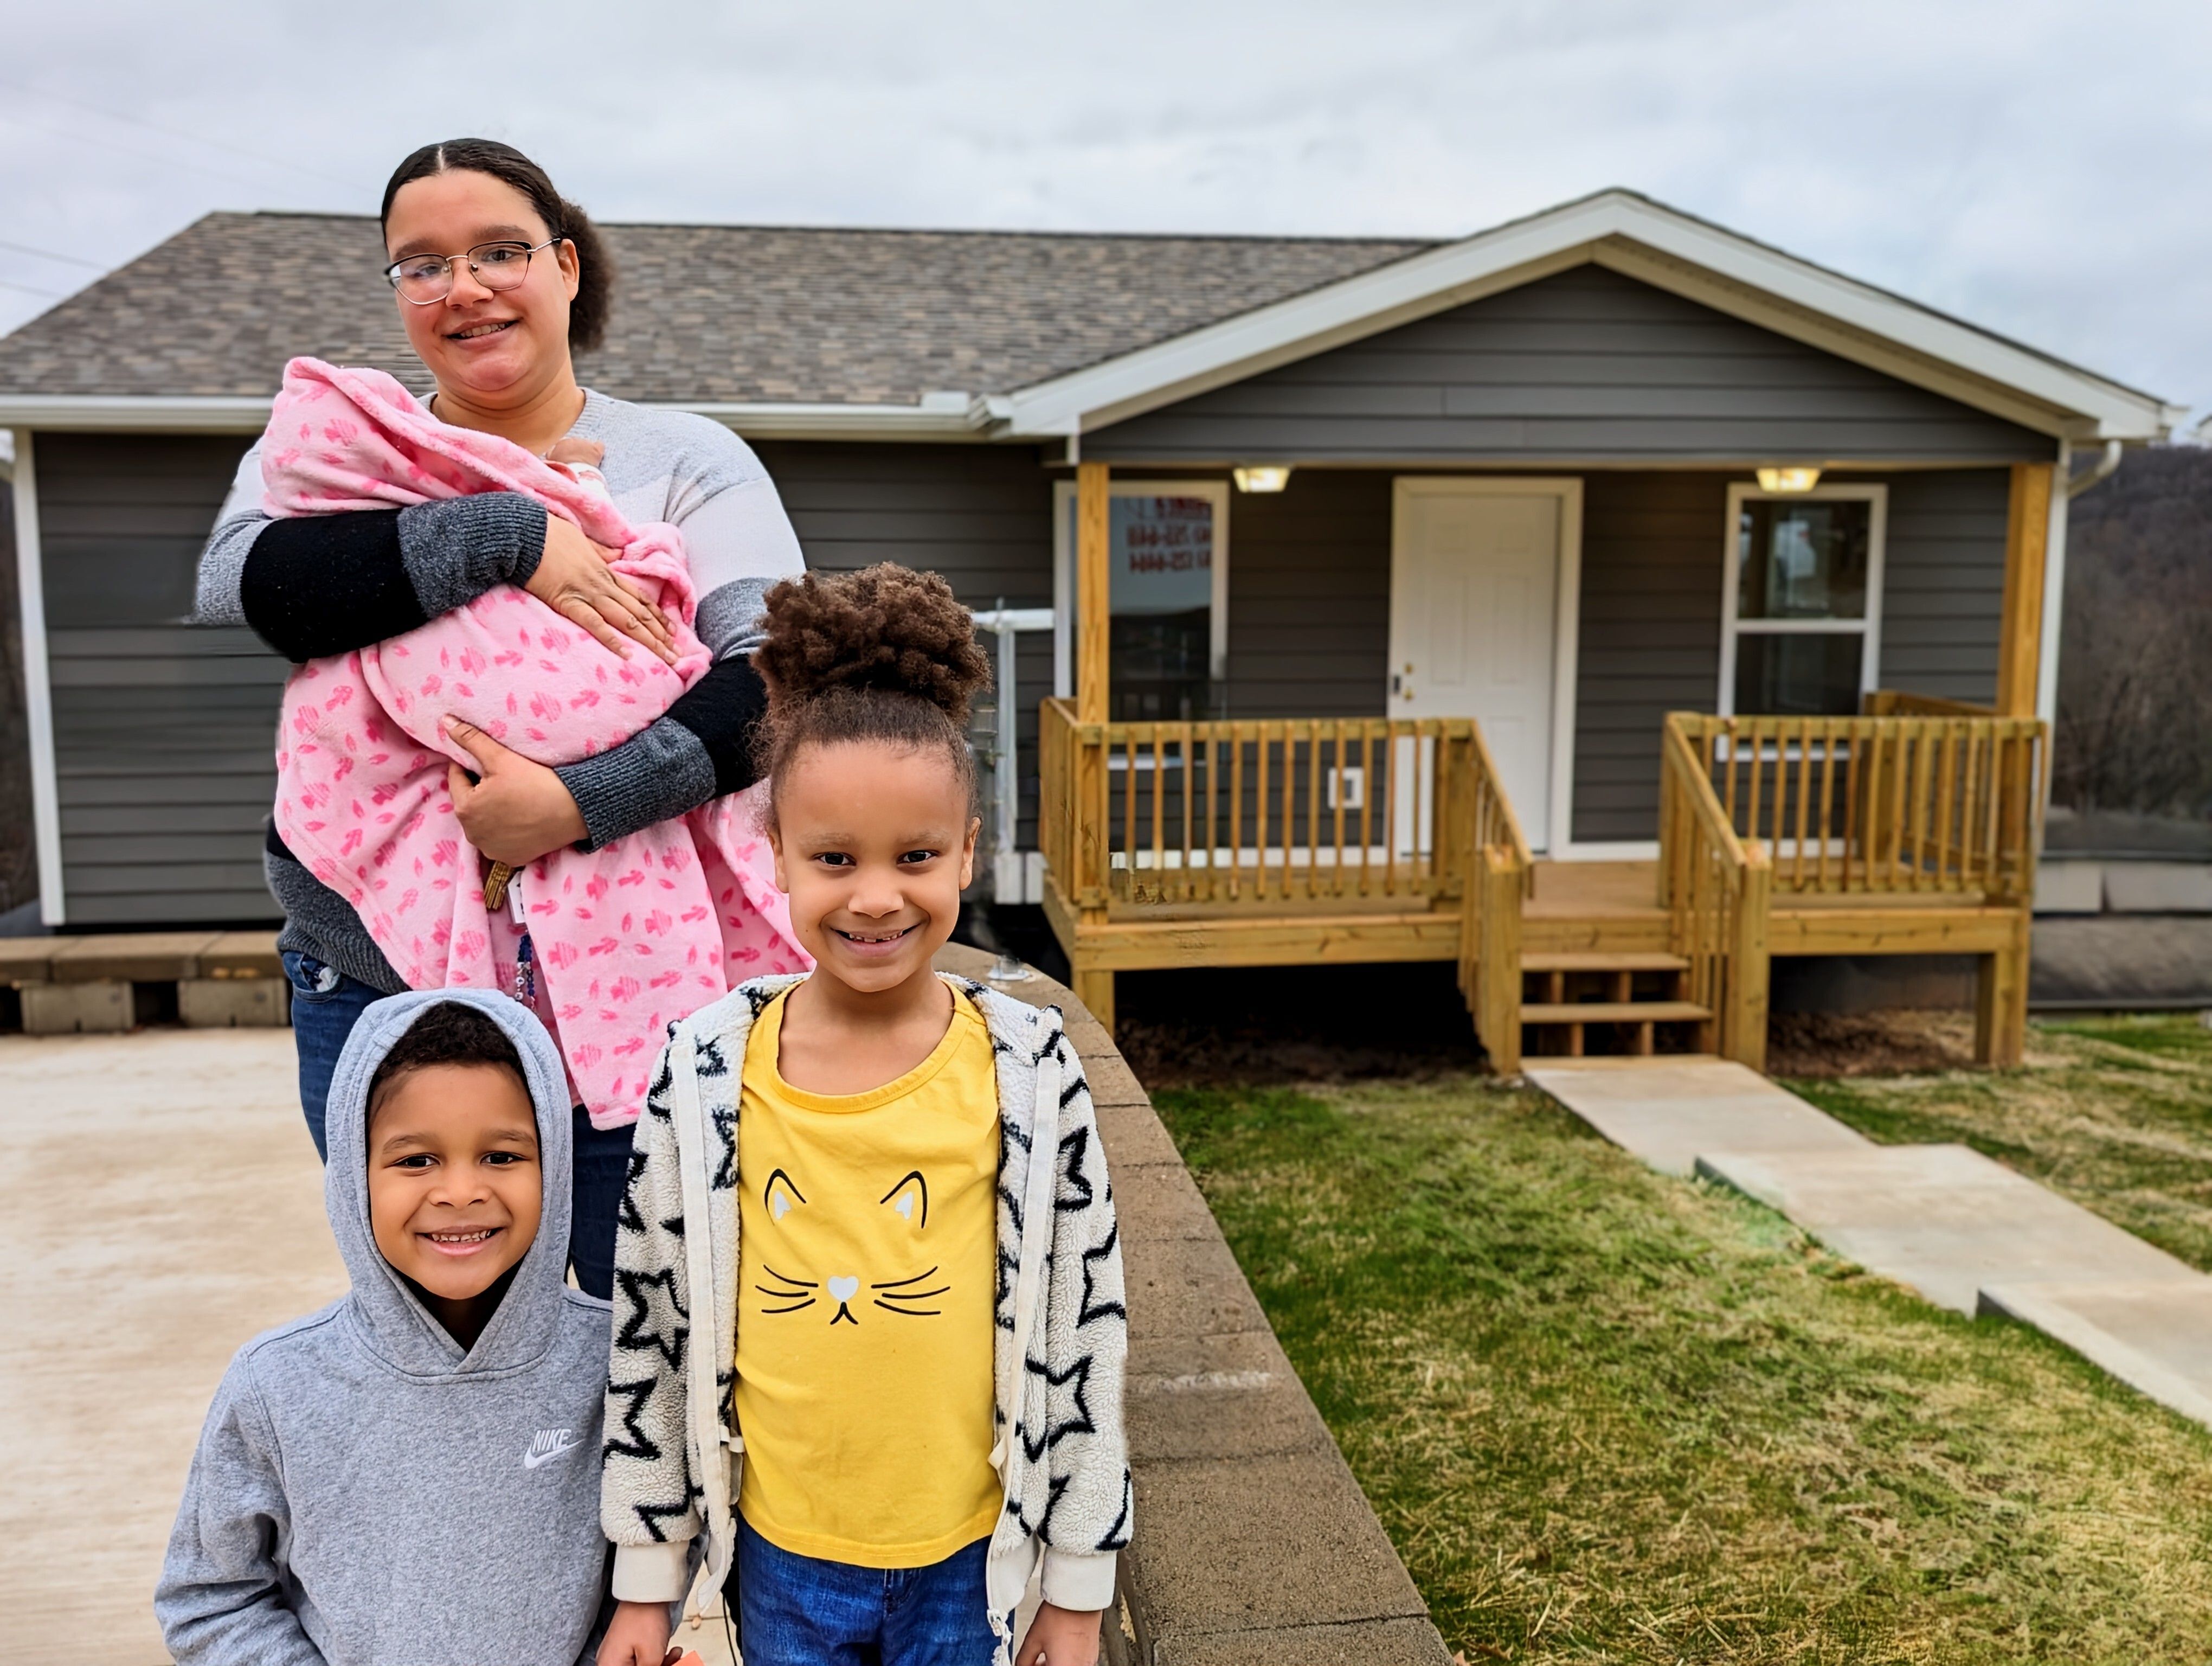 Cheyenne, alongside her children, received the keys to their new home this week, just in time for the holidays.